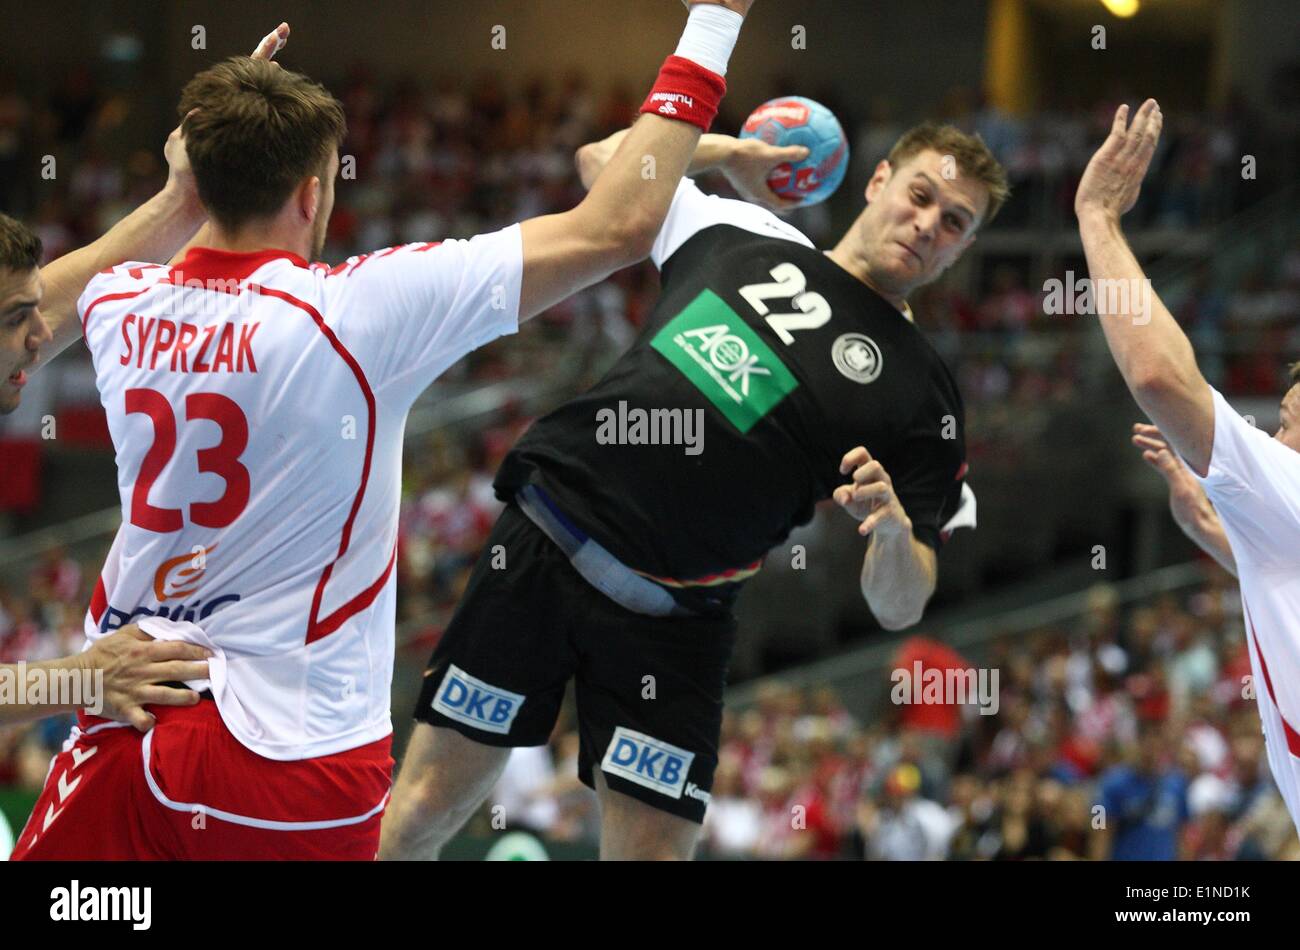 Gdansk, Poland 7th, June 2014 Quatar 2015 Men's World Handball Championship Play Off game between Poland and Germany at ERGO Arena sports hall. Michael Kraus (22) in action during the game. Credit:  Michal Fludra/Alamy Live News Stock Photo